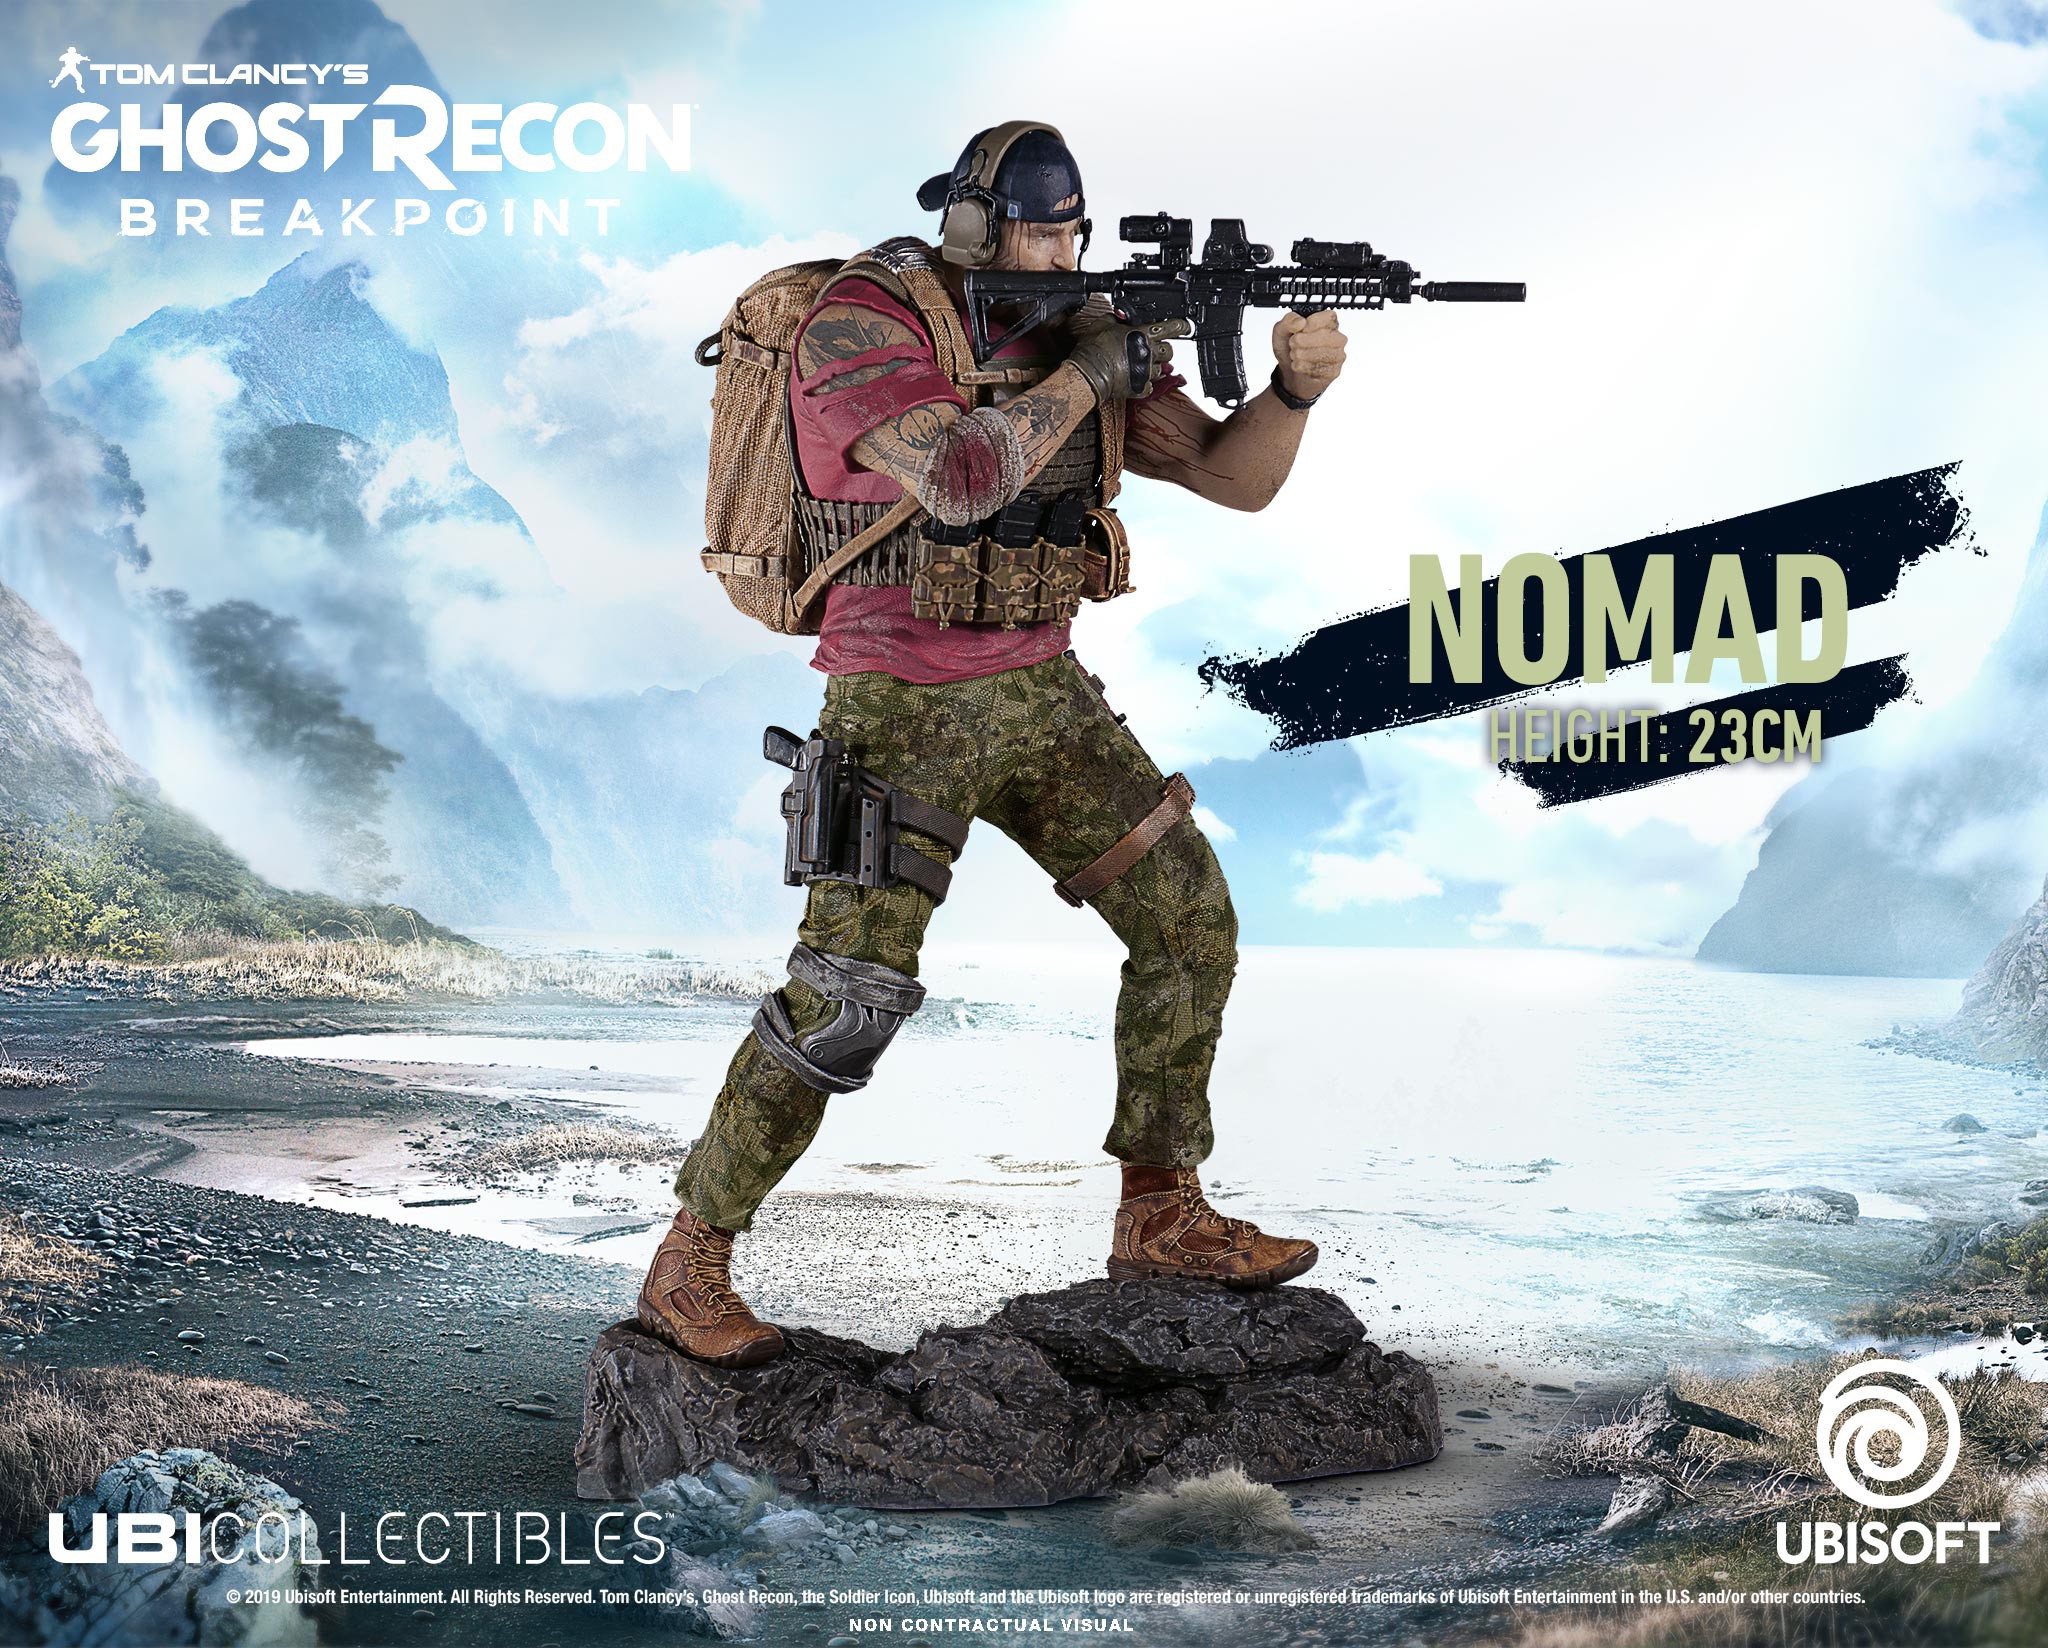 Ghost Recon Breakpoint Nomad statula | 23cm